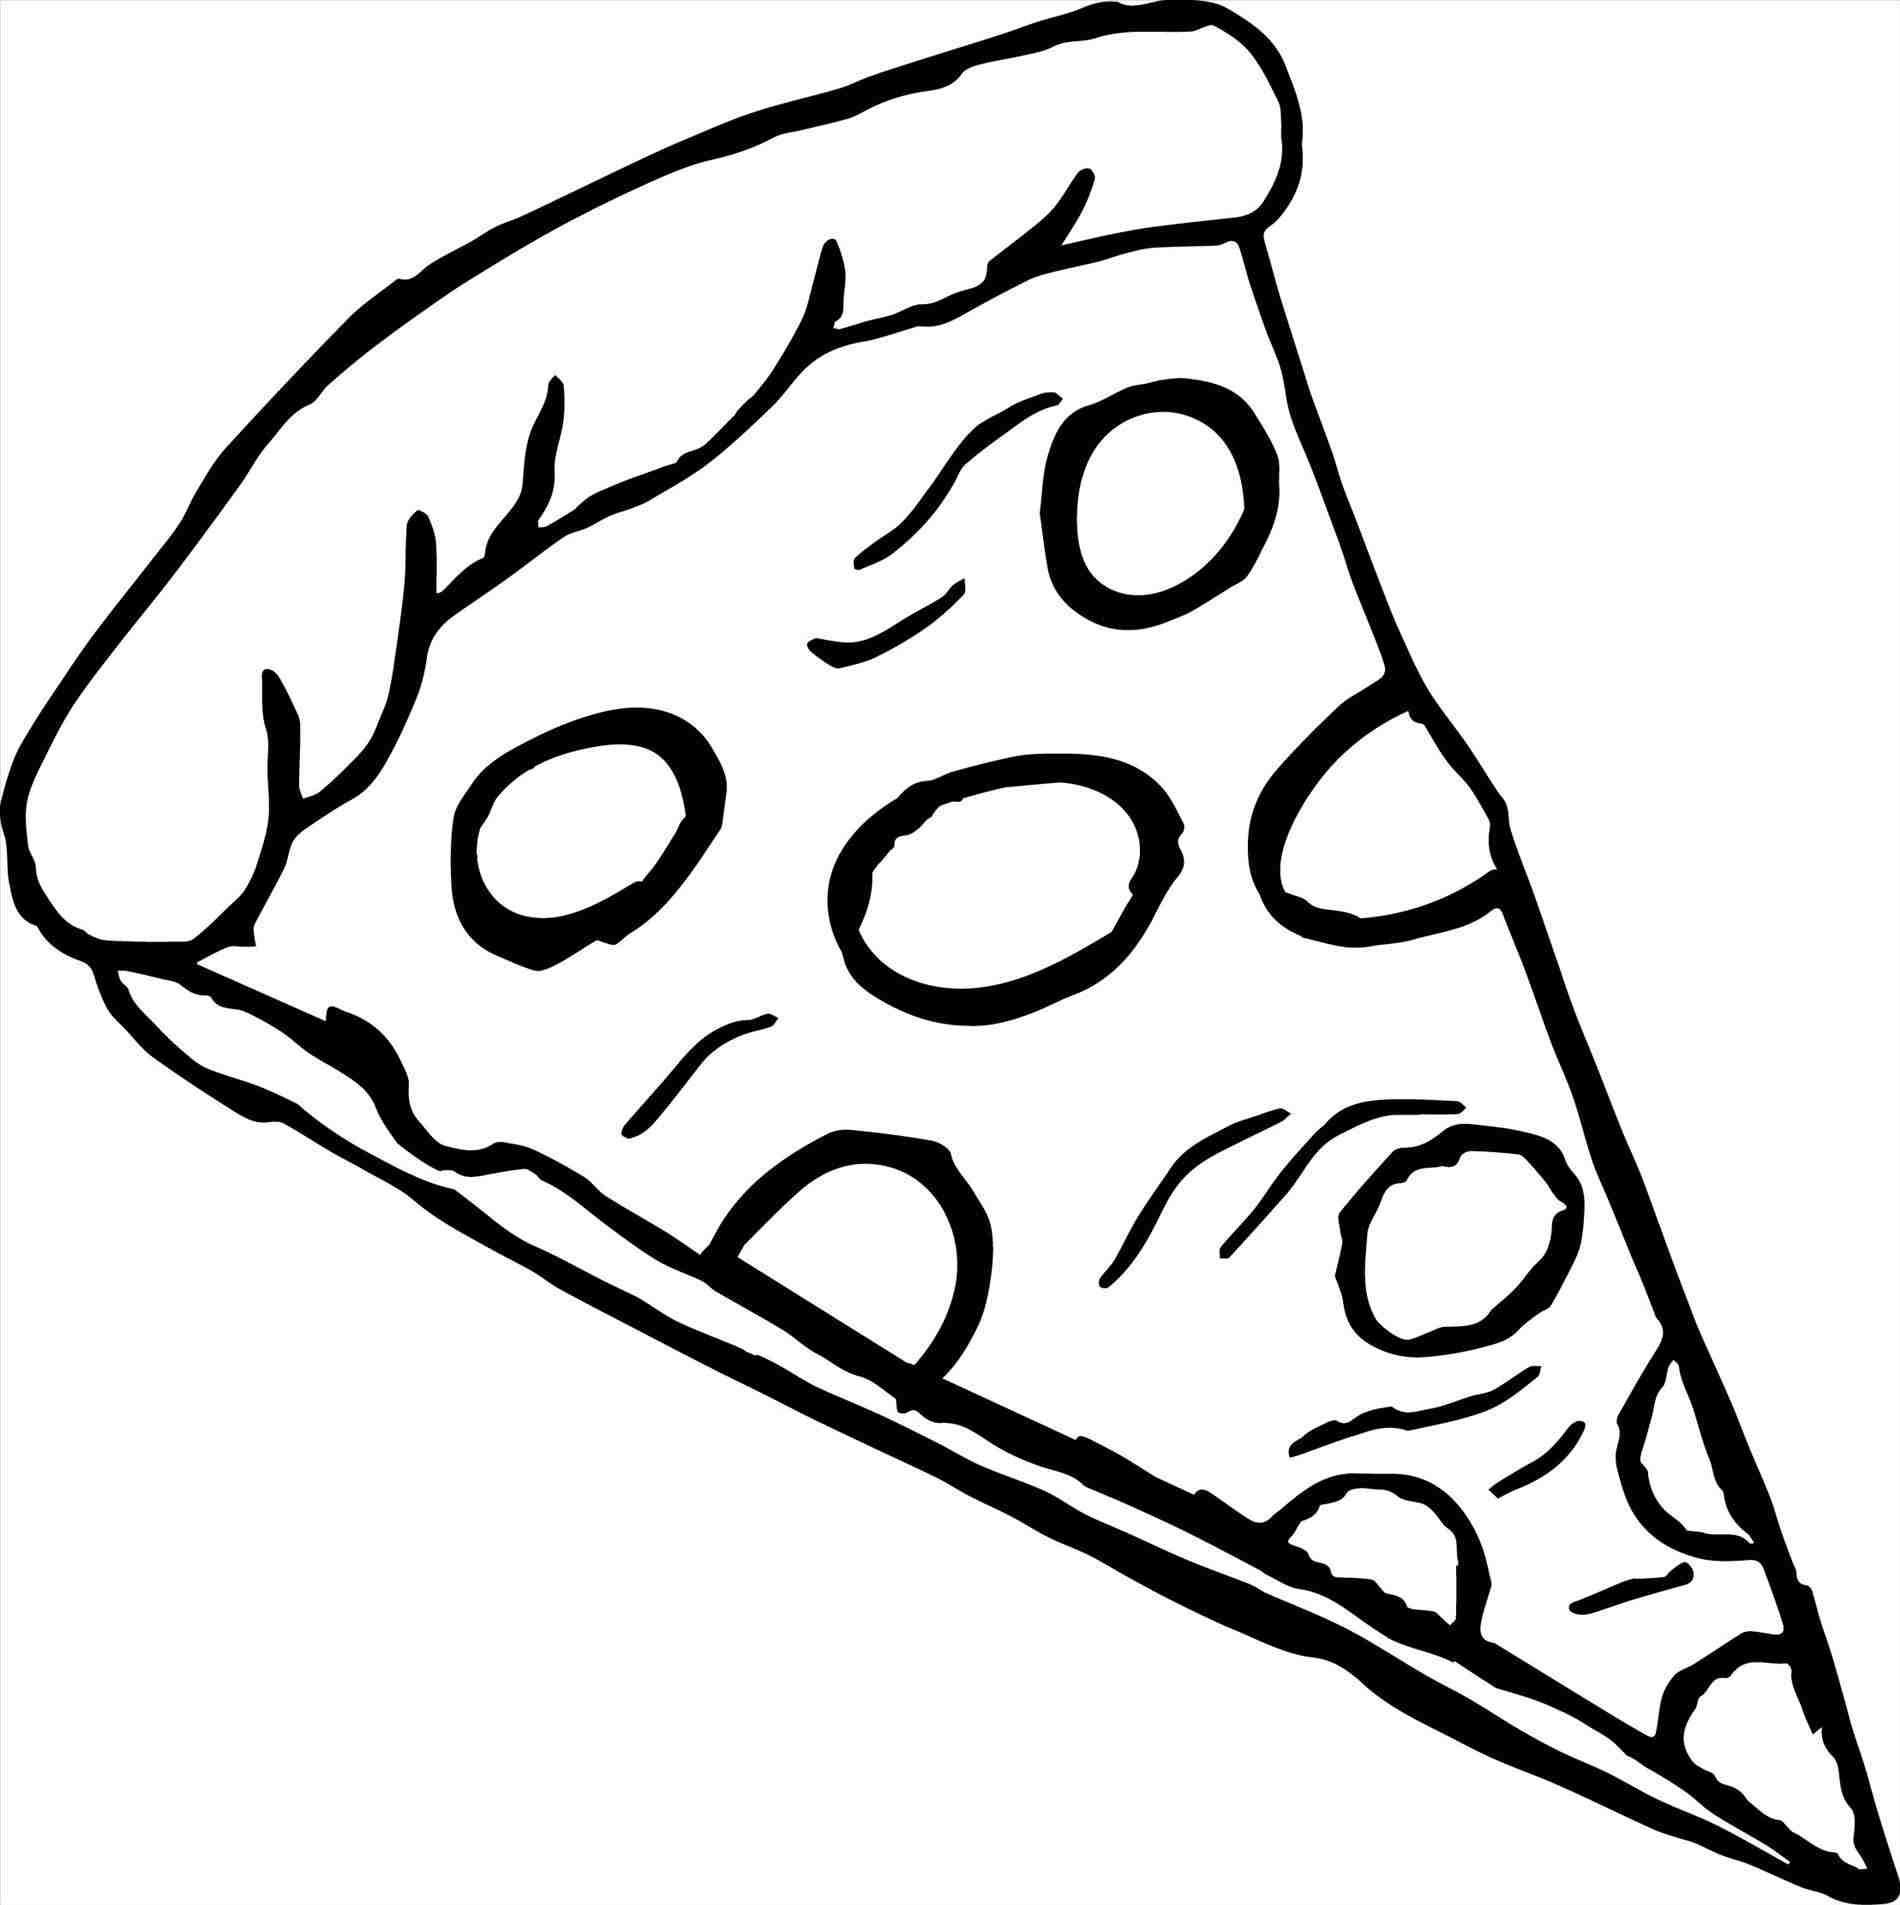 Pizza Slice Of Pizza Clipart Black And White » Clipart Station.